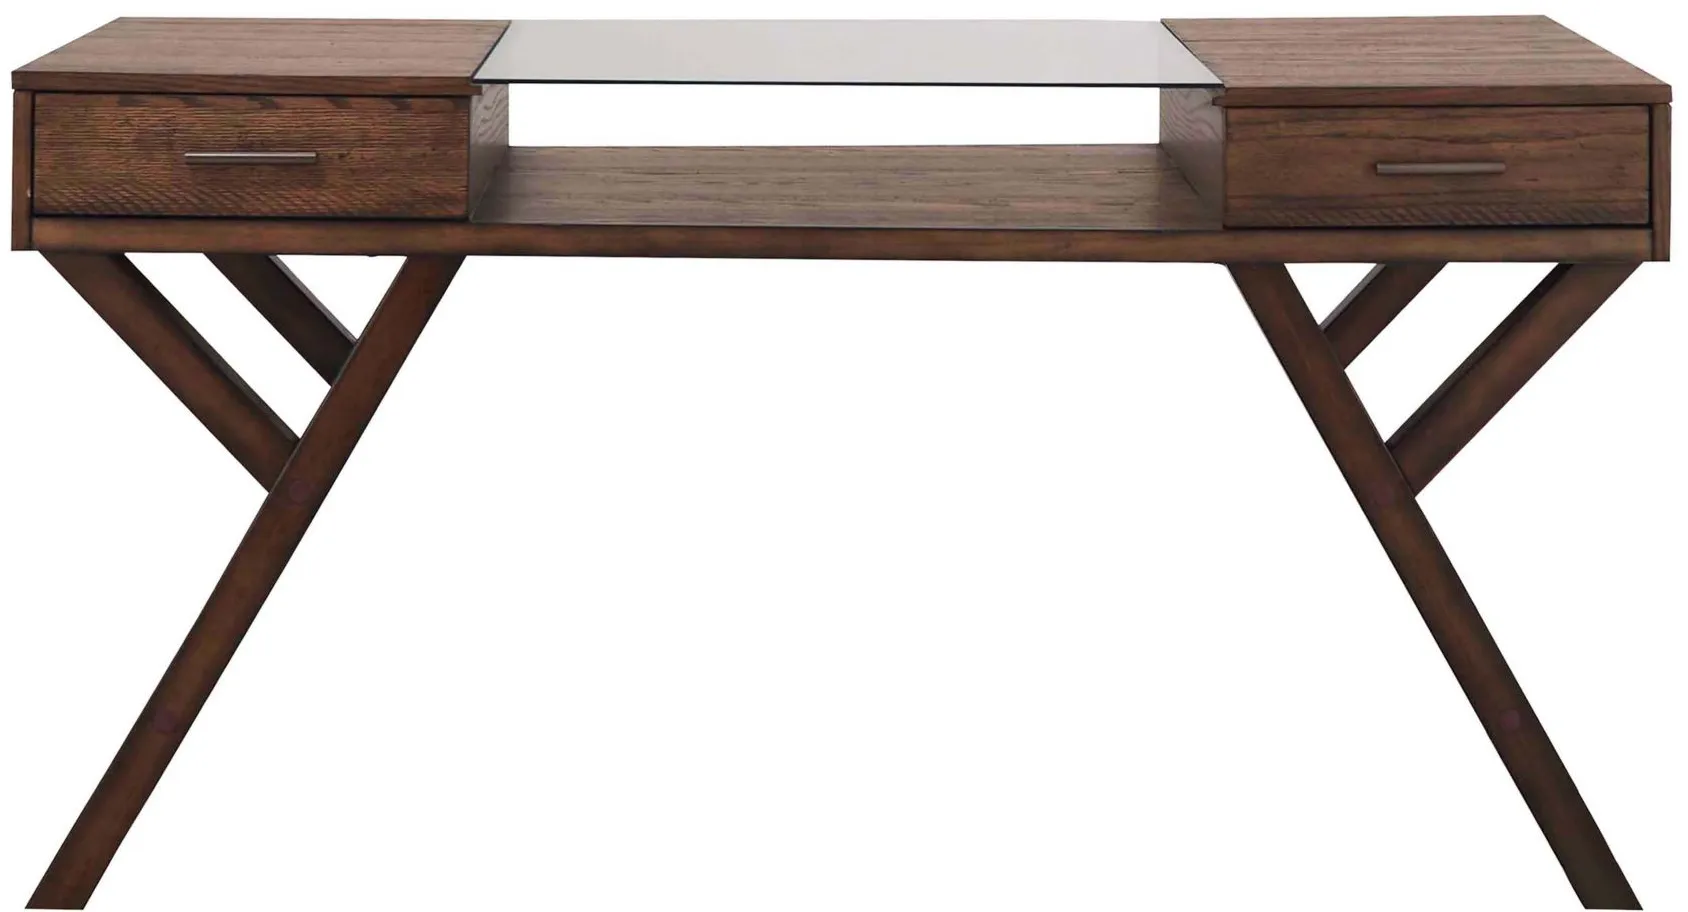 Houghton Writing Desk in Weathered Chestnut by Liberty Furniture